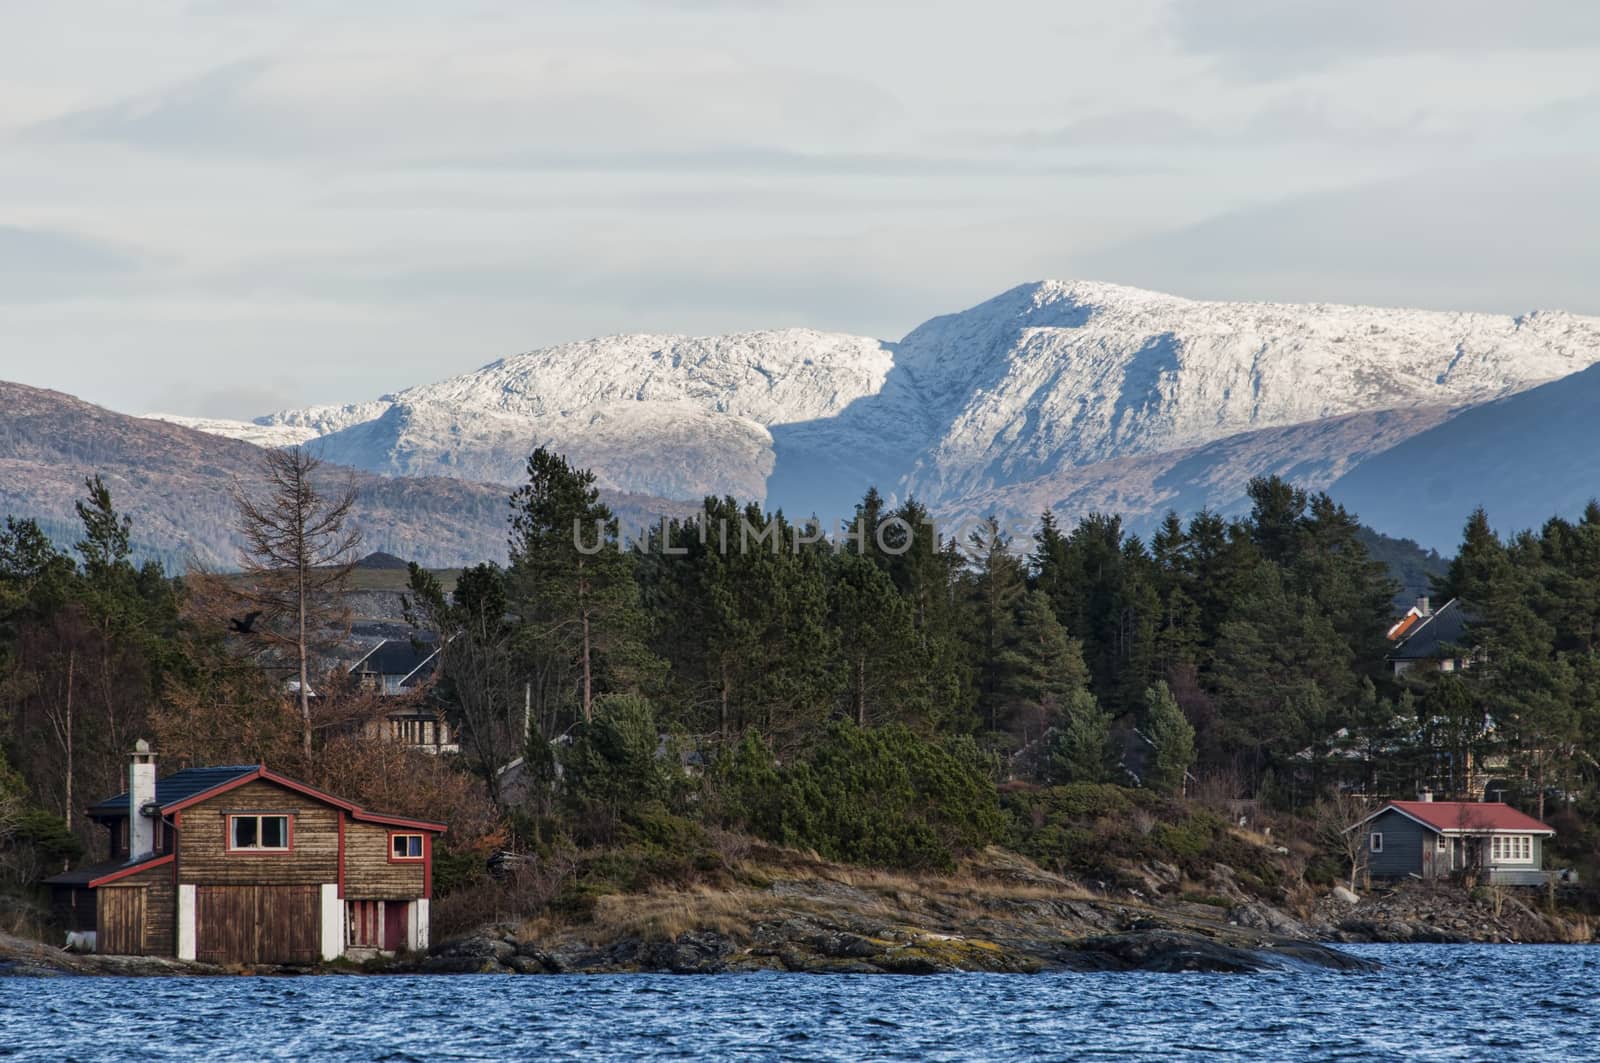 Cabins by the coast with mountains covered in snow in the background